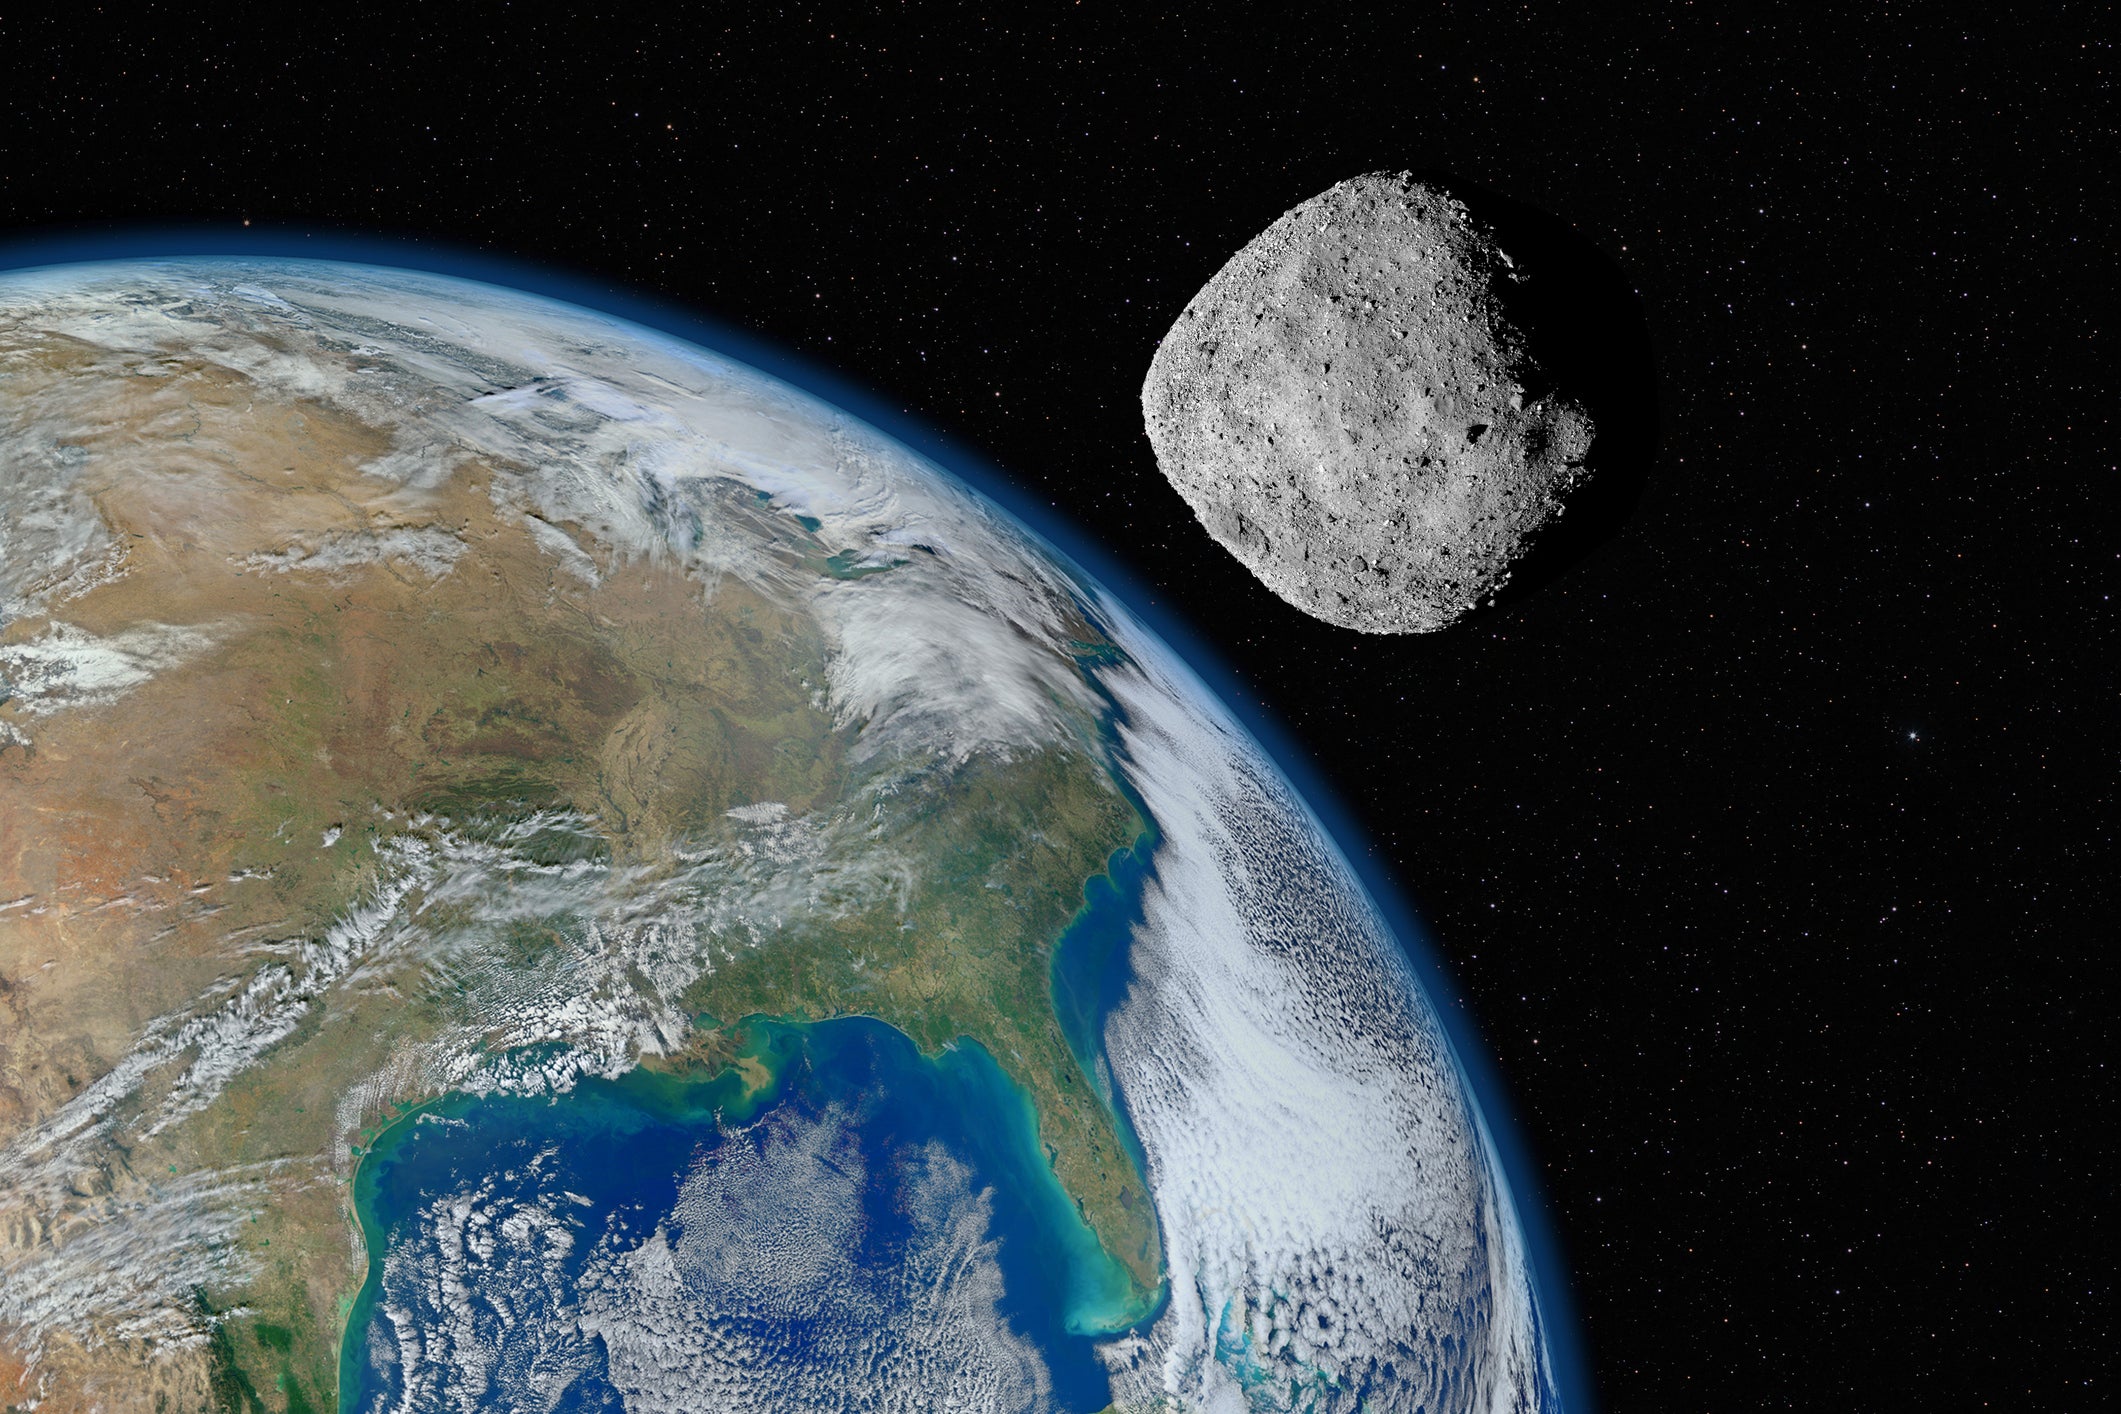 ‘Potentially hazardous’ asteroid 2021 KT1 the size of a skyscraper